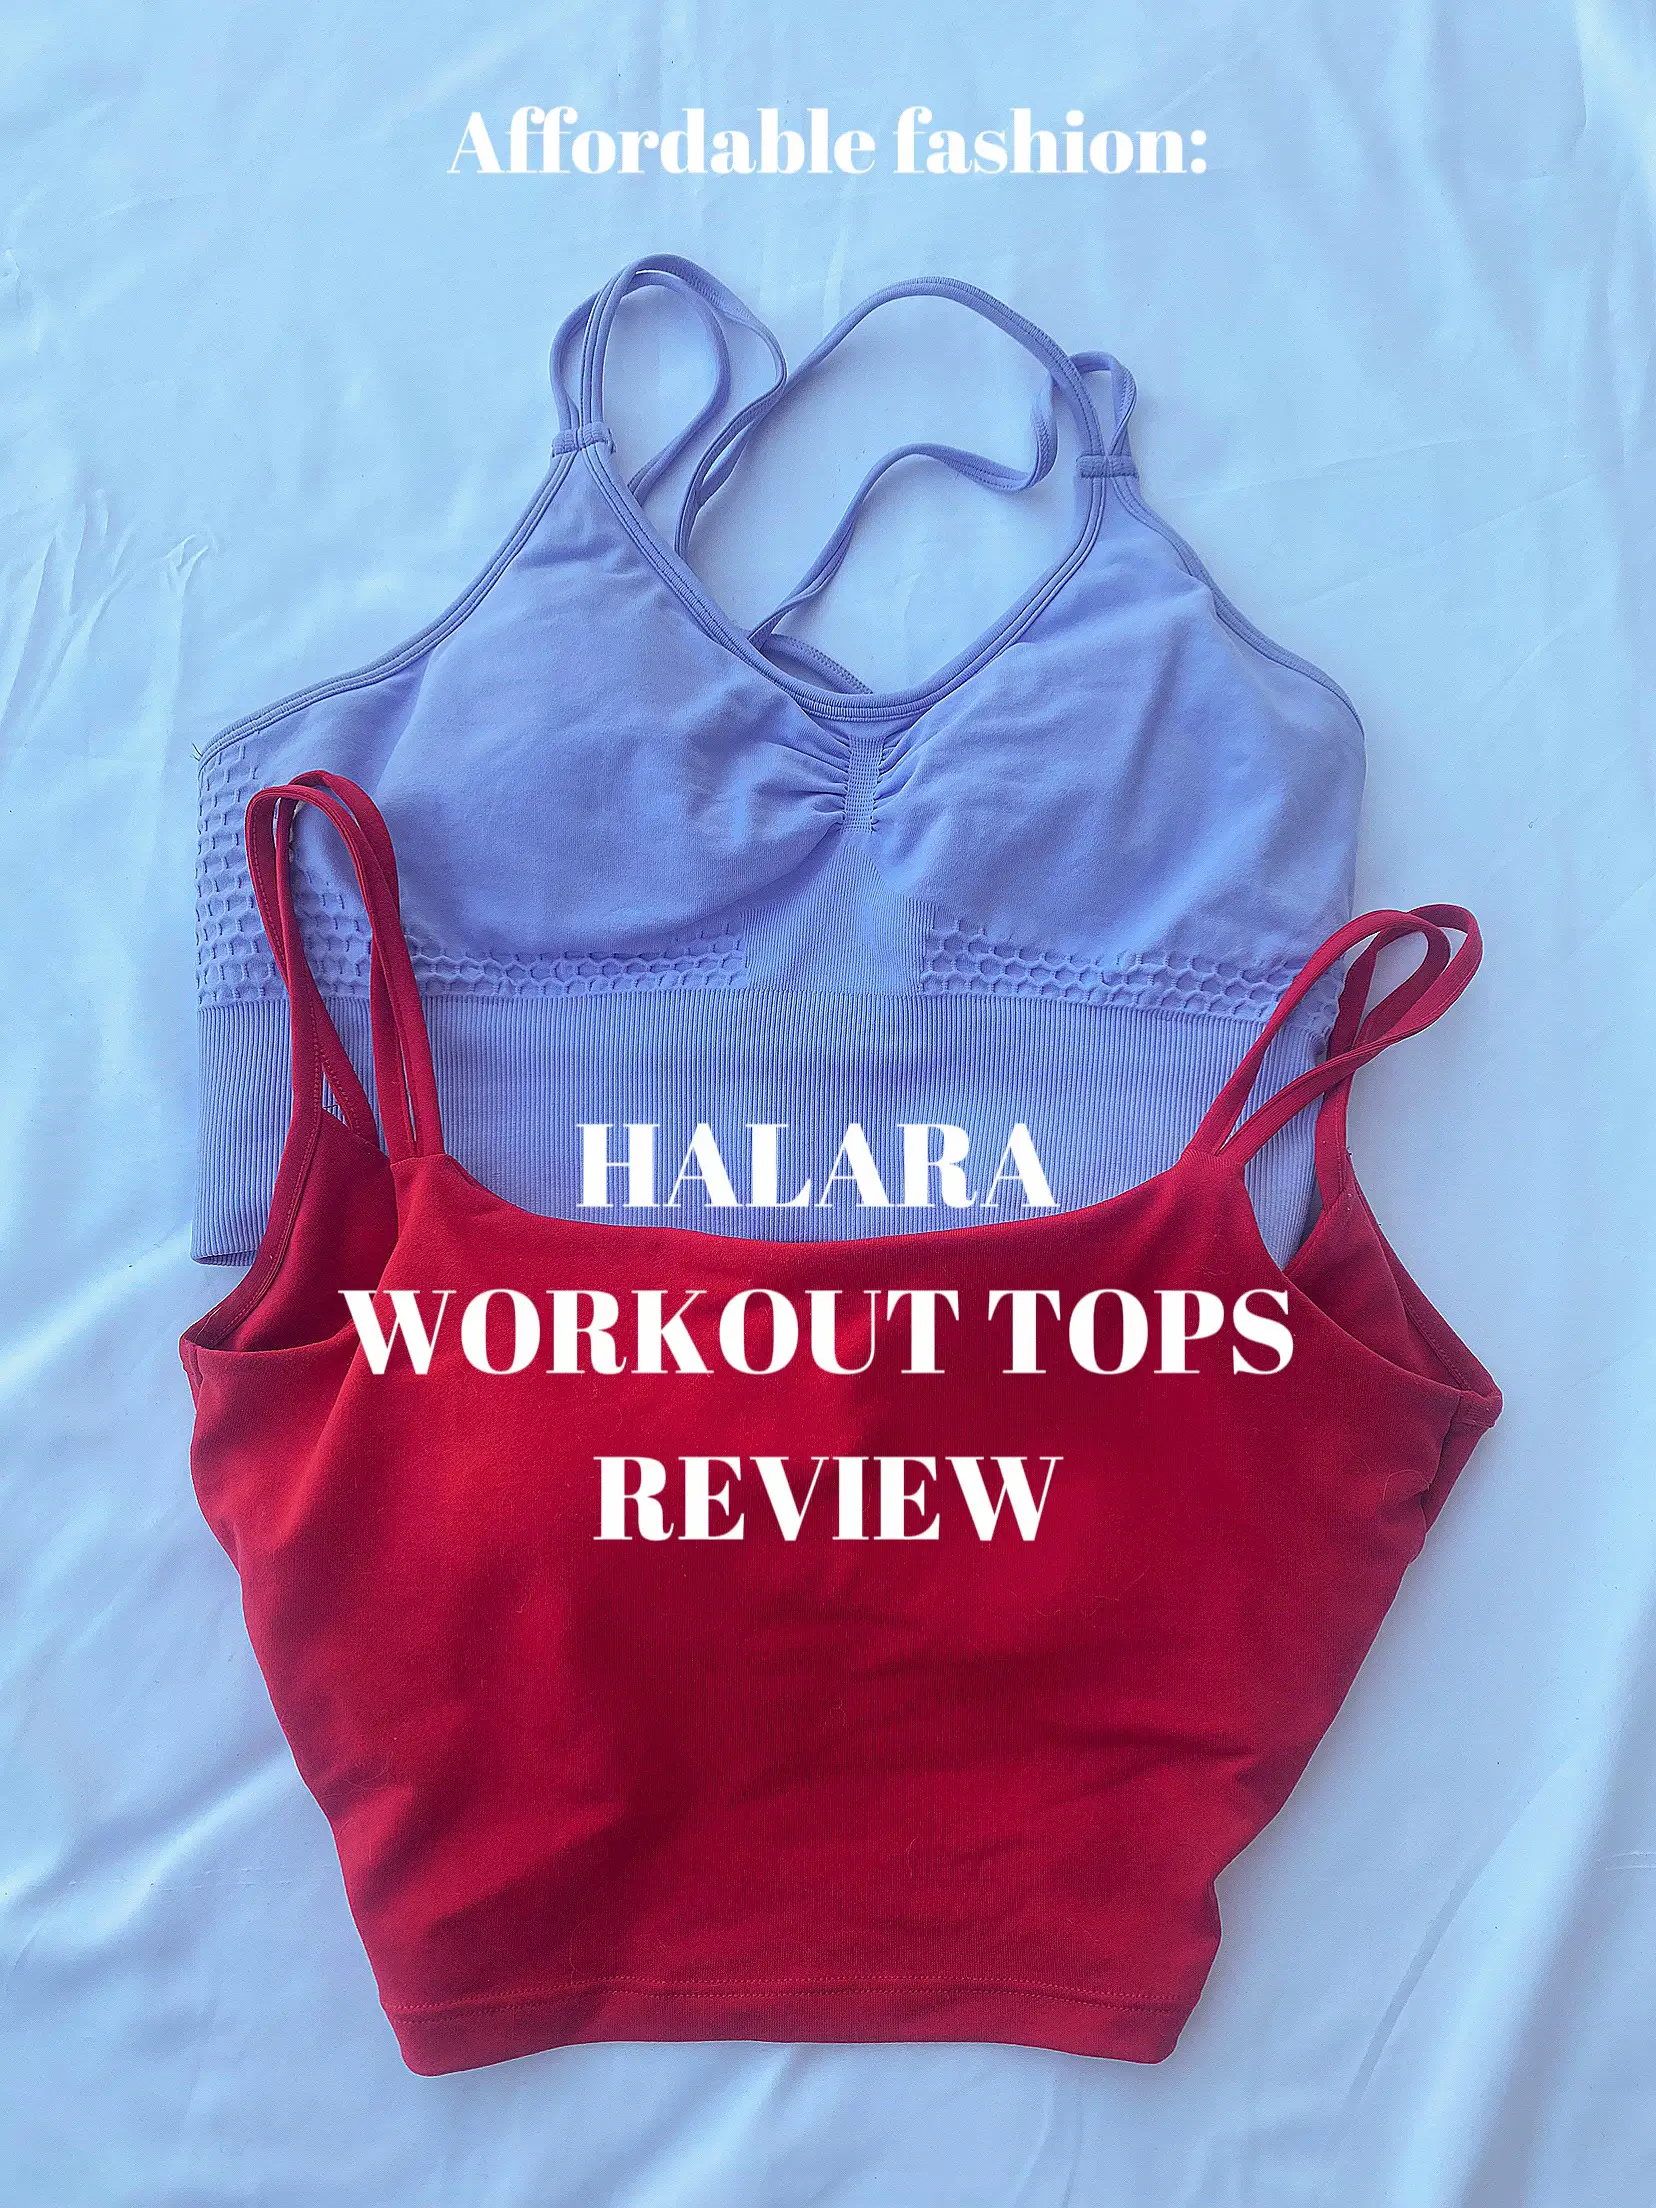 Is Halara worth it?, First Impressions, Review